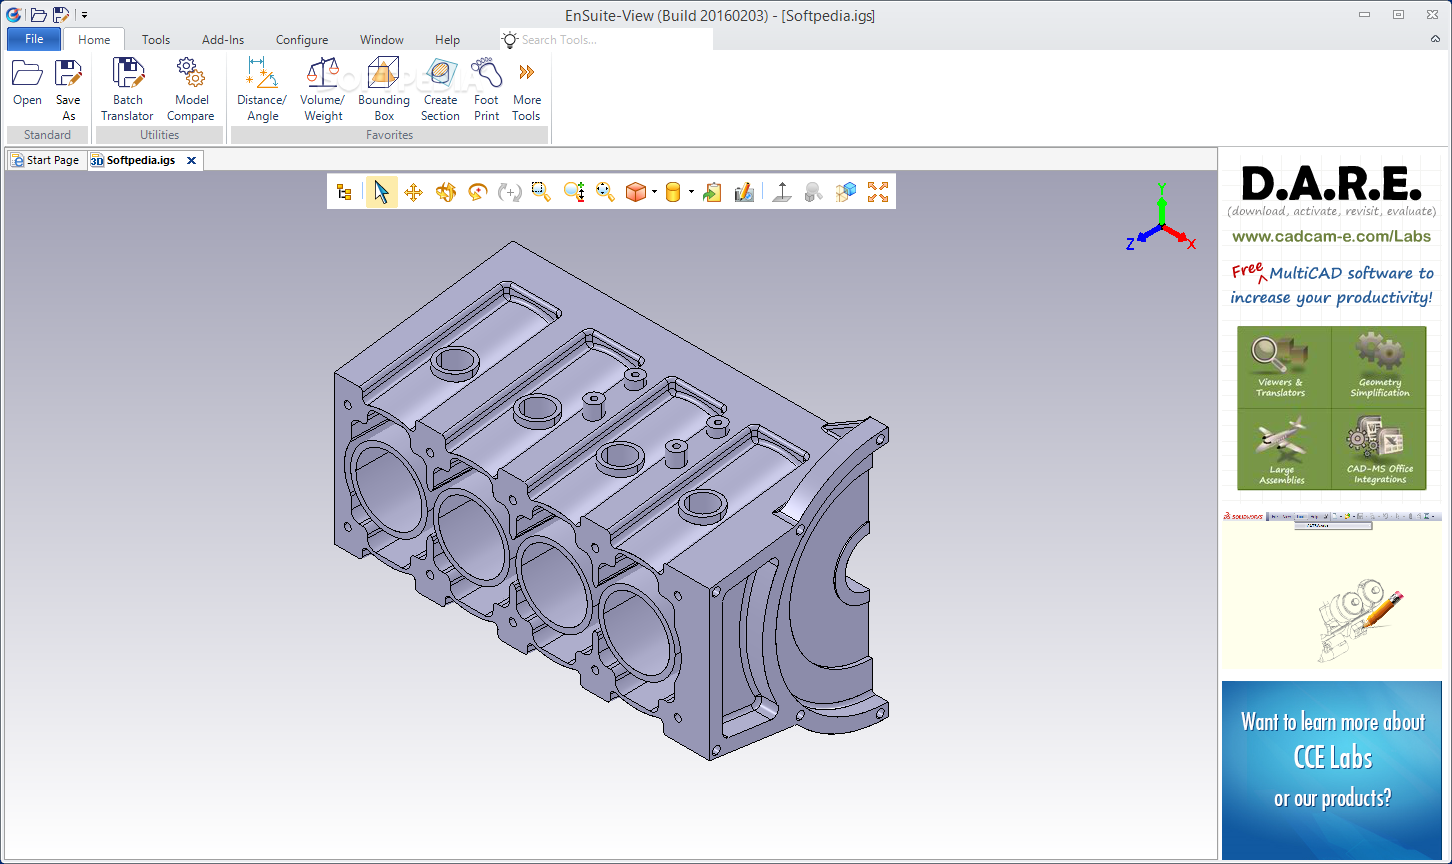 Top 11 Science Cad Apps Like EnSuite-View - Best Alternatives